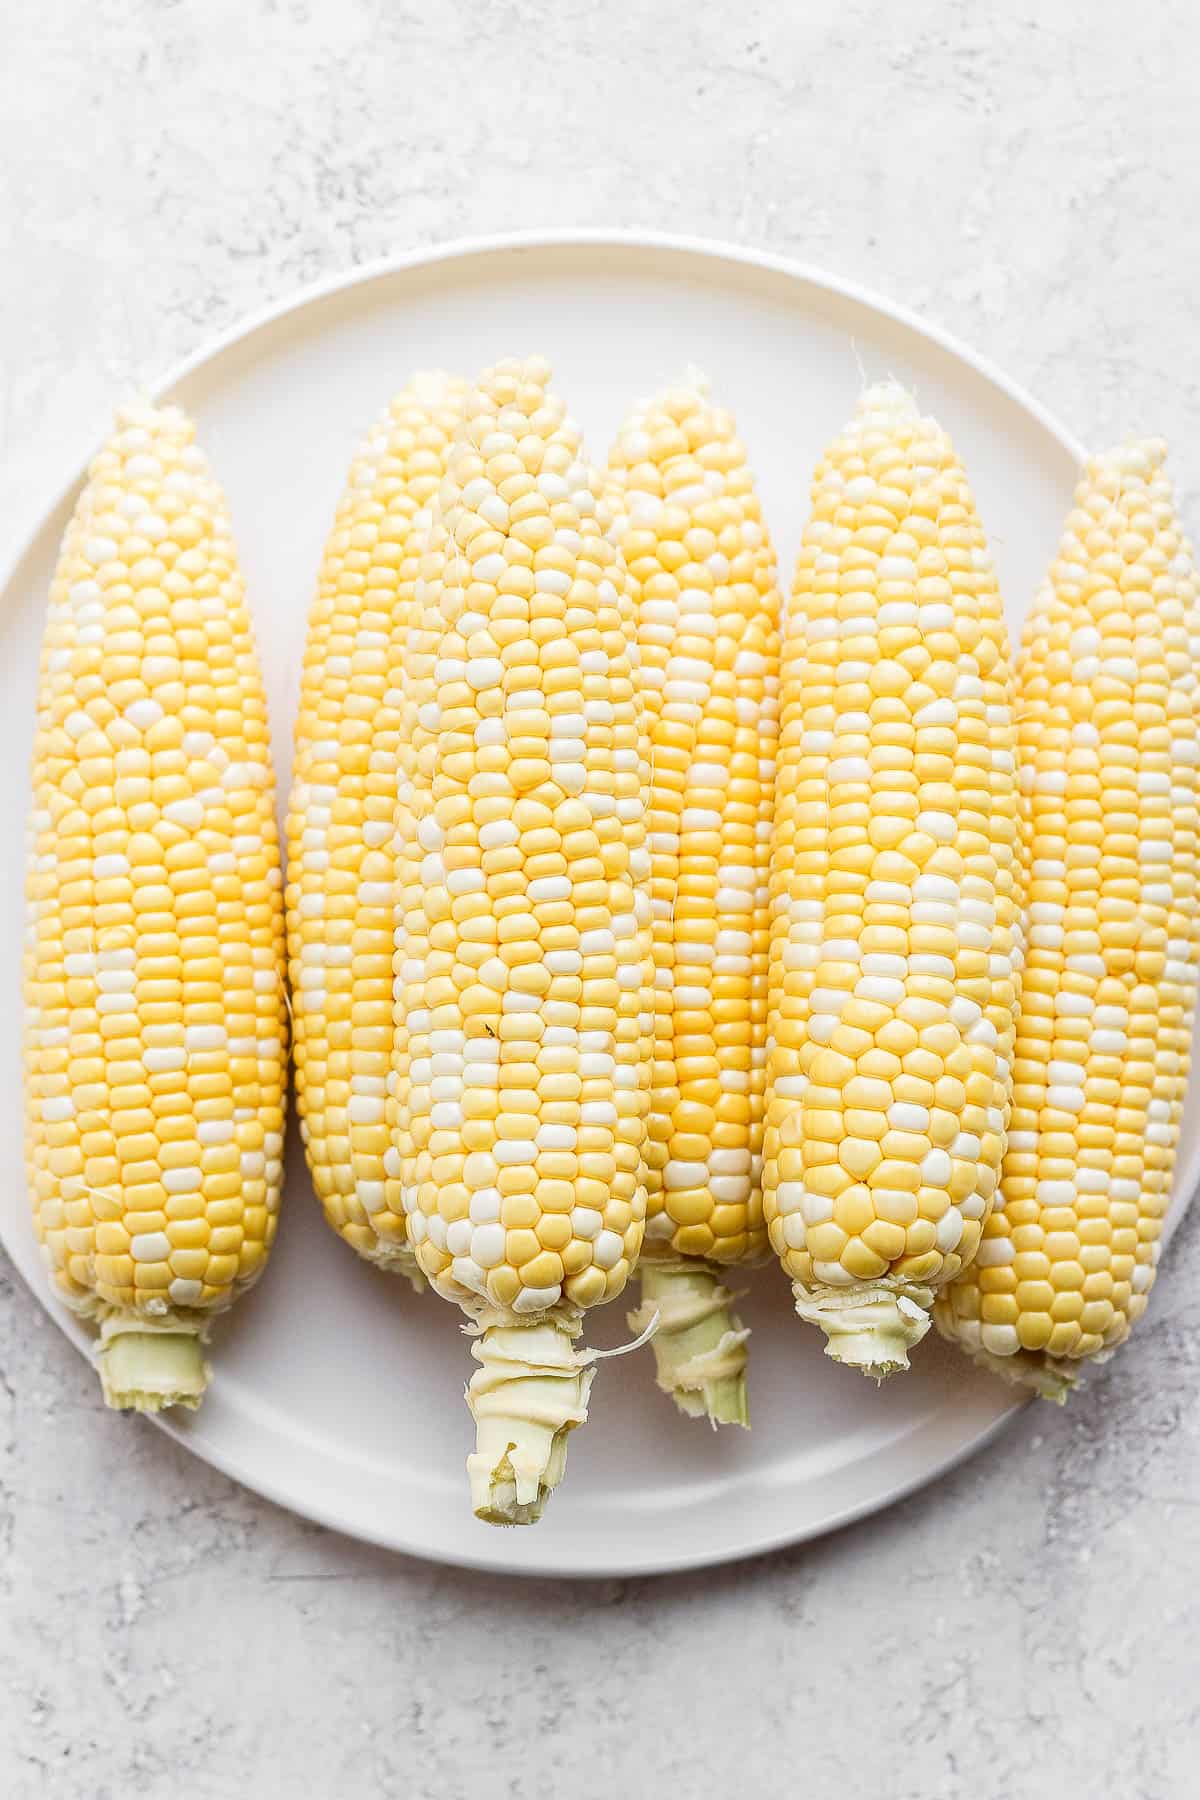 Shucked ears of corn on a plate.